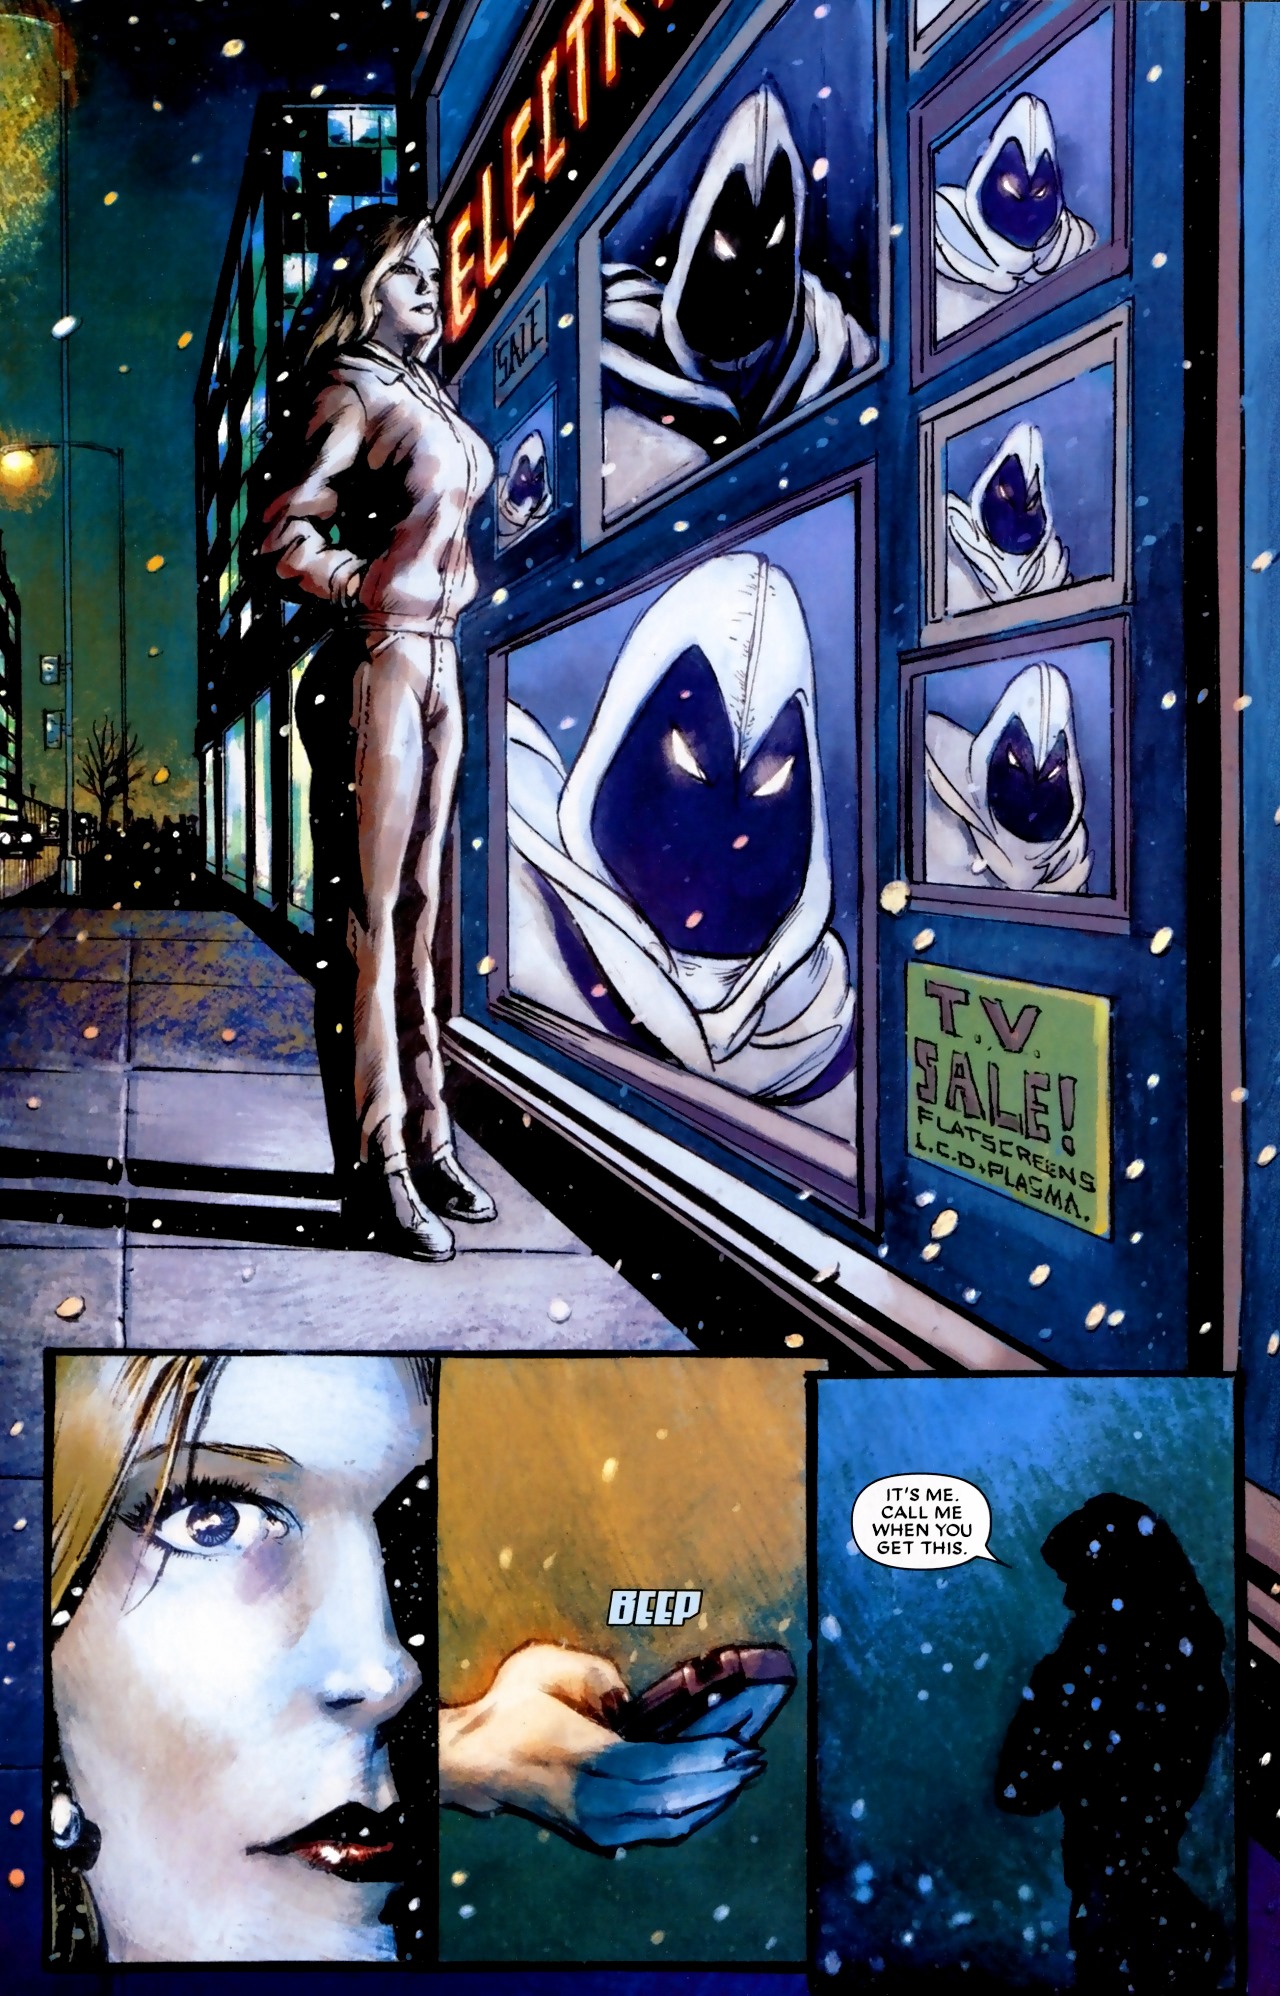  Moon Knight #17 - God and Country, Chapter Four